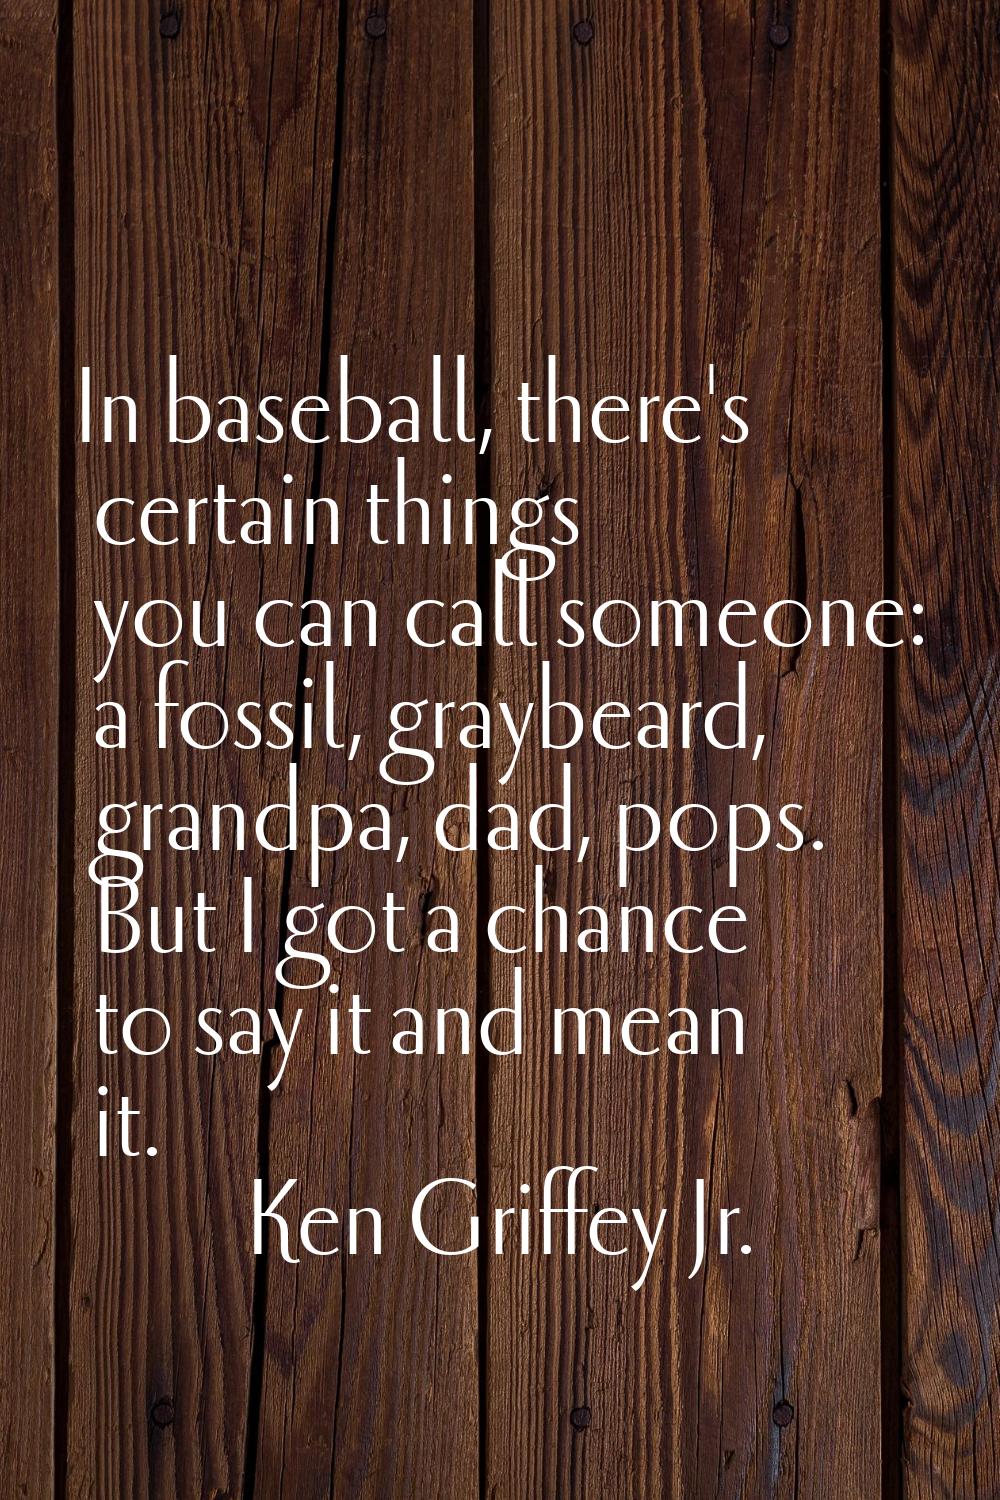 In baseball, there's certain things you can call someone: a fossil, graybeard, grandpa, dad, pops. 